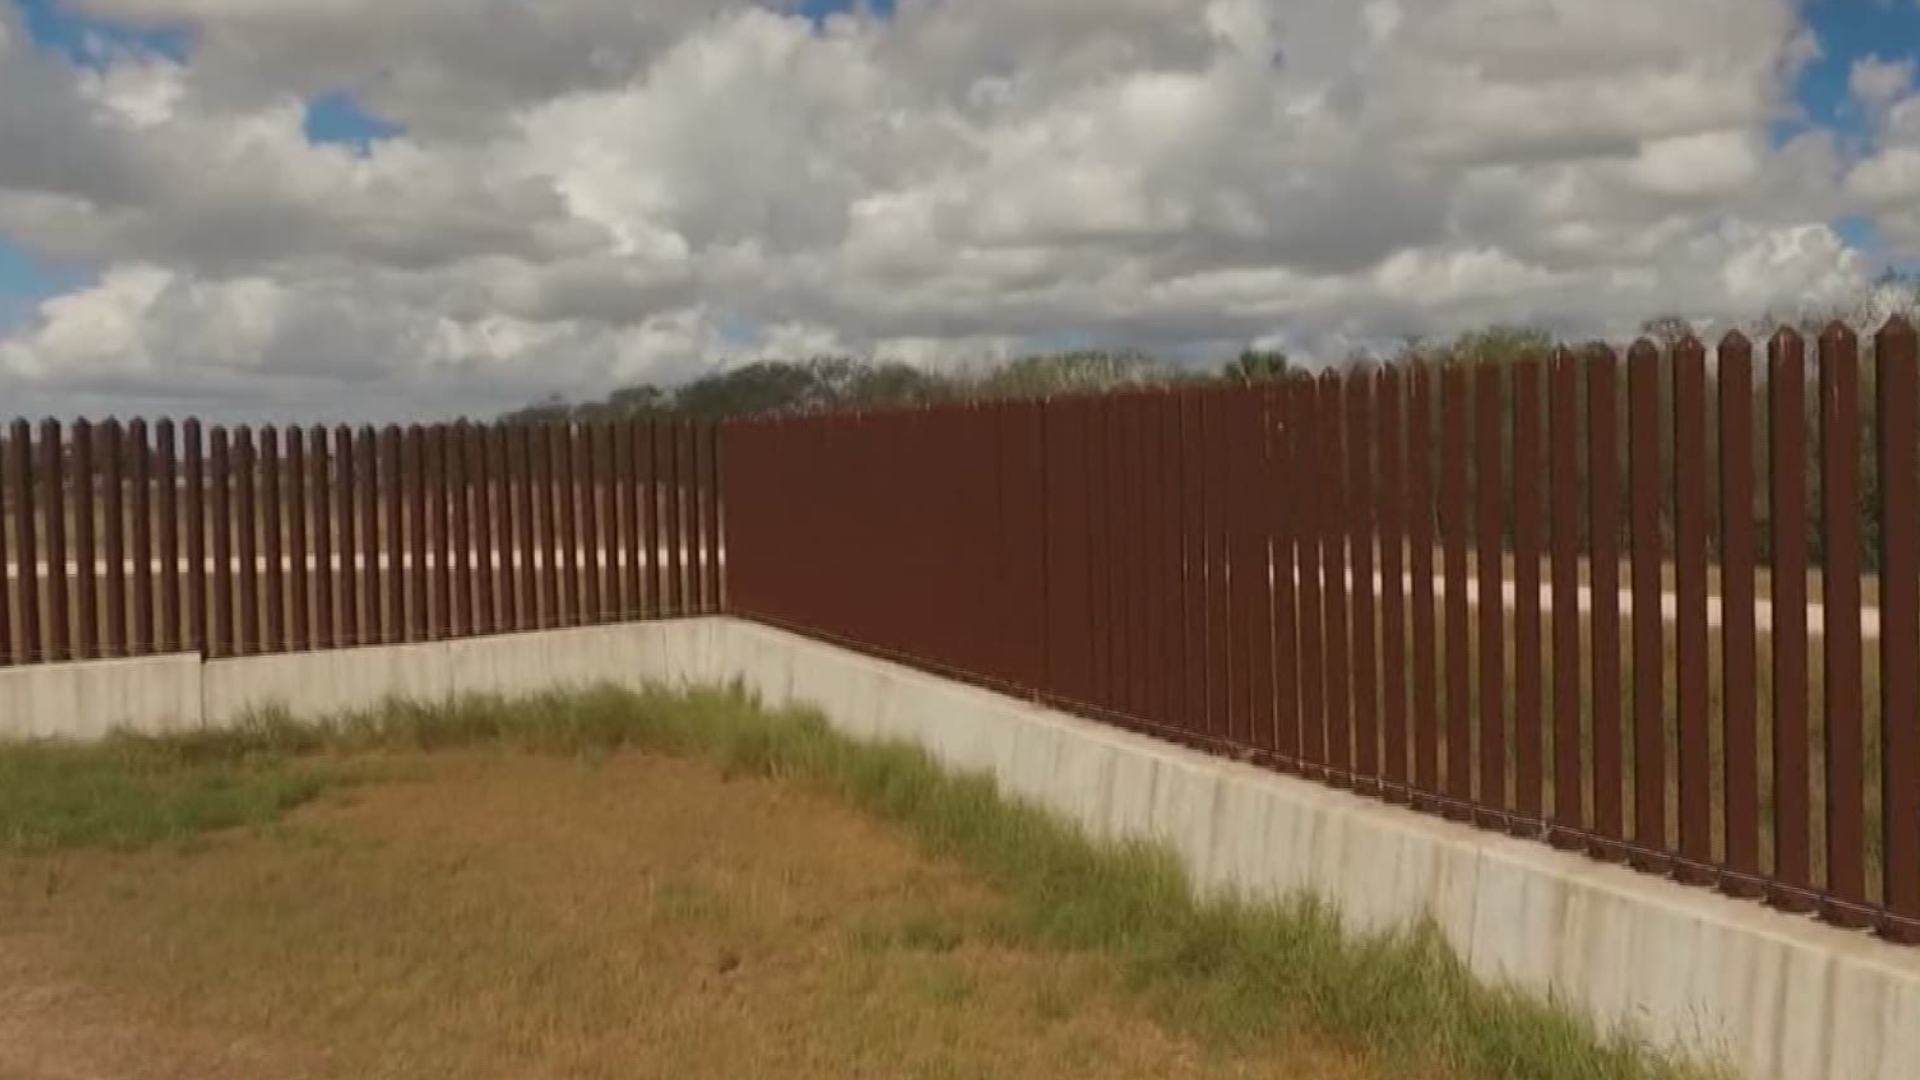 Amid the government shutdown over border wall funding, President Trump wants to visit Texas next month to kick off his first border wall project. Border reporter Oscar Margain explains.